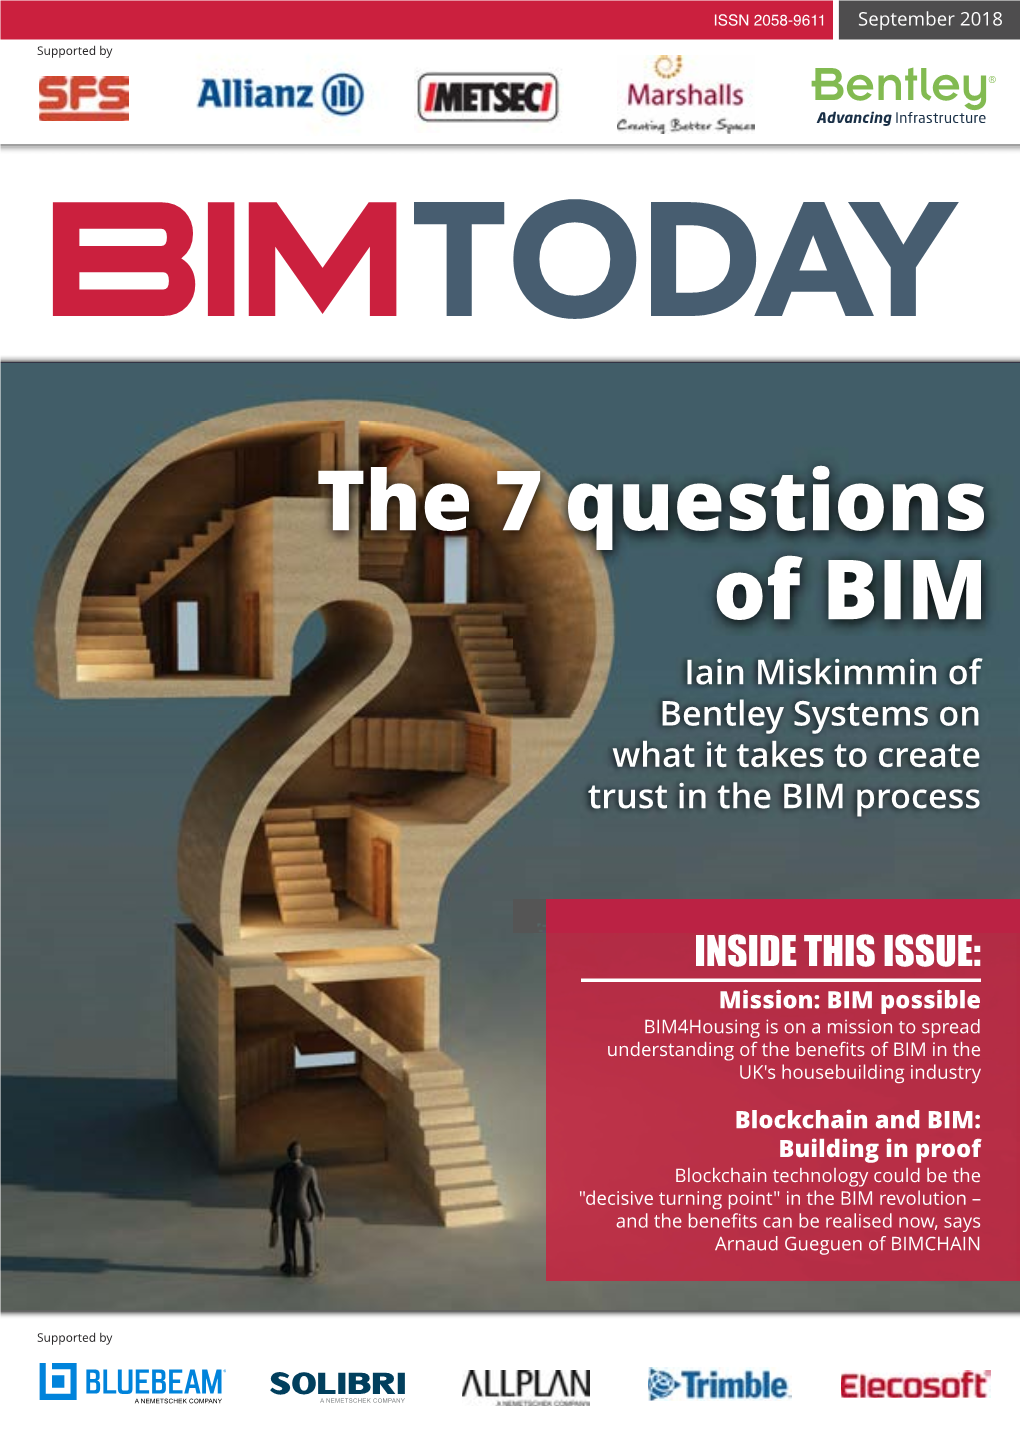 The 7 Questions of BIM Iain Miskimmin of Bentley Systems on What It Takes to Create Trust in the BIM Process